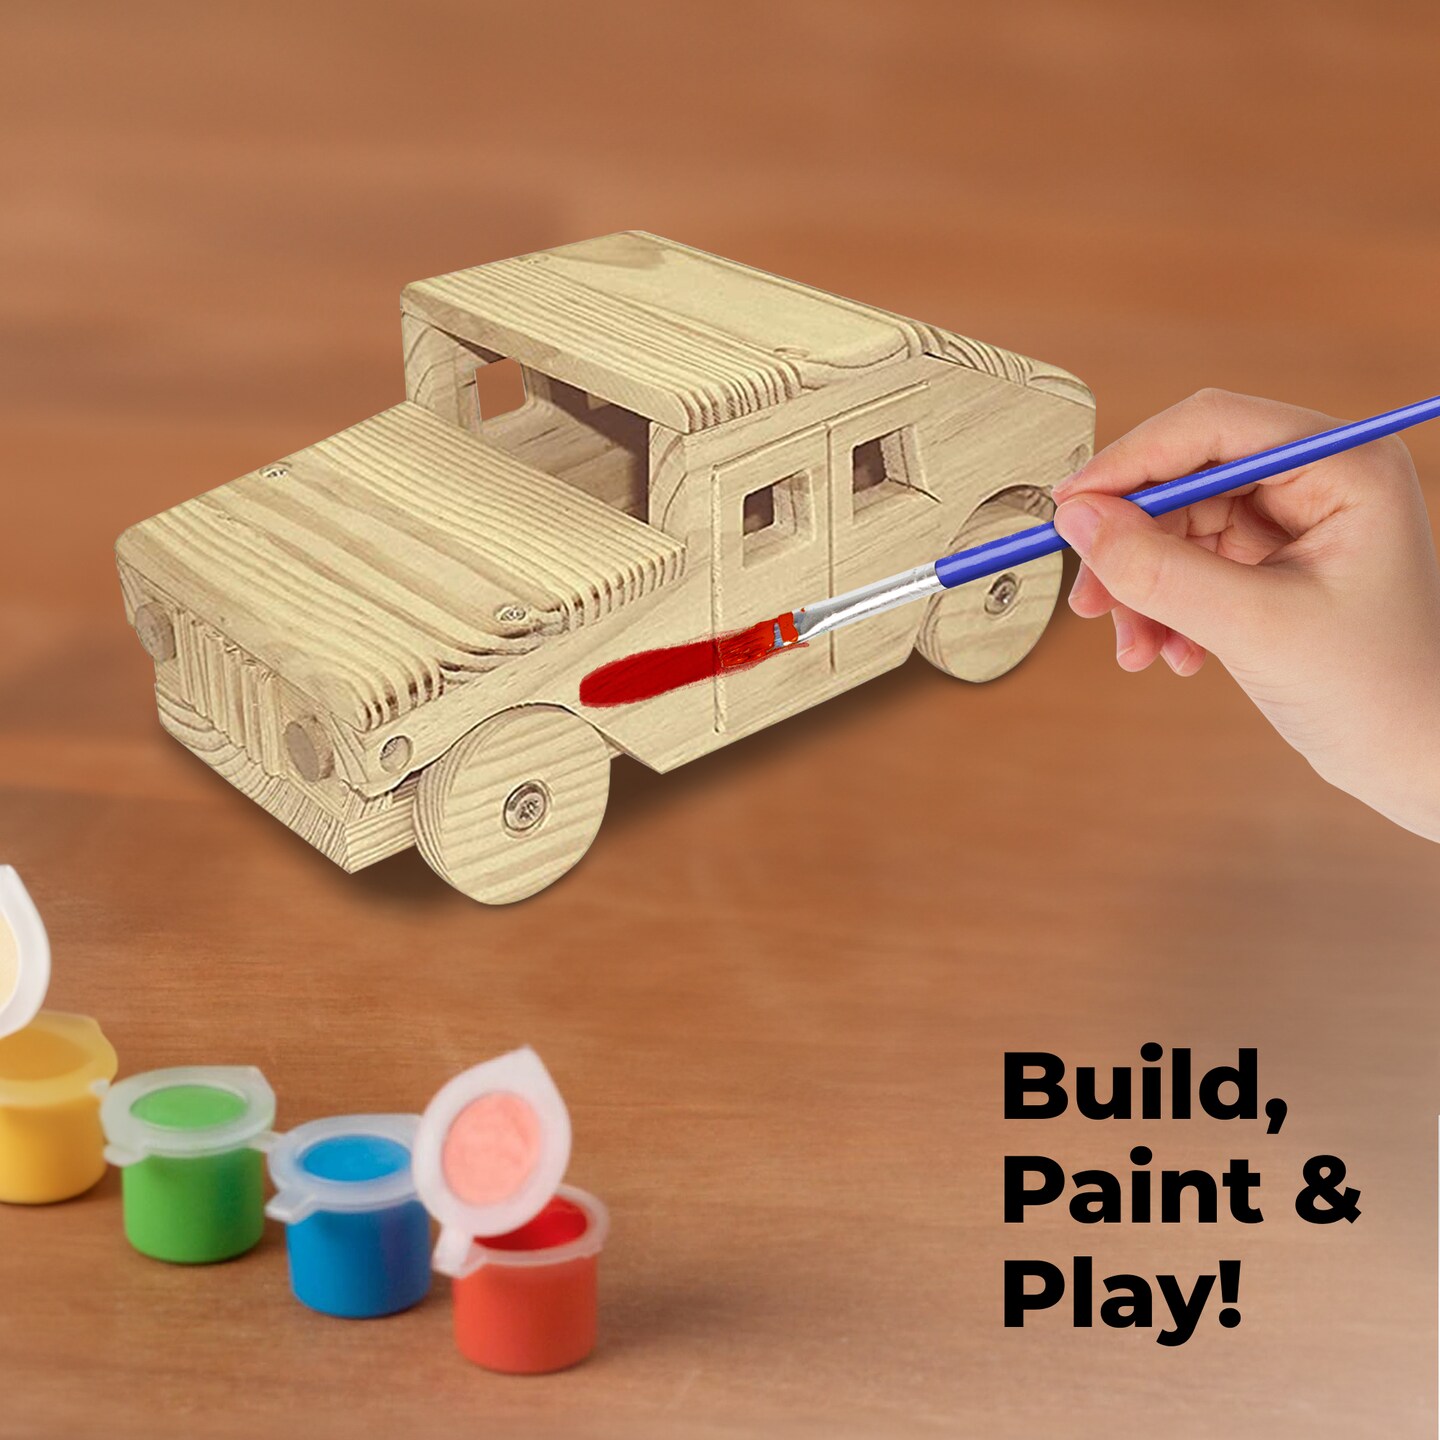 Kraftic Woodworking Building Kit for Kids and Adults, 3 Educational DIY Carpentry Construction Wood Model Kit STEM Toy Projects for Boys and Girls - Wooden Military Vehicle, Excavator and Bird-Feeder